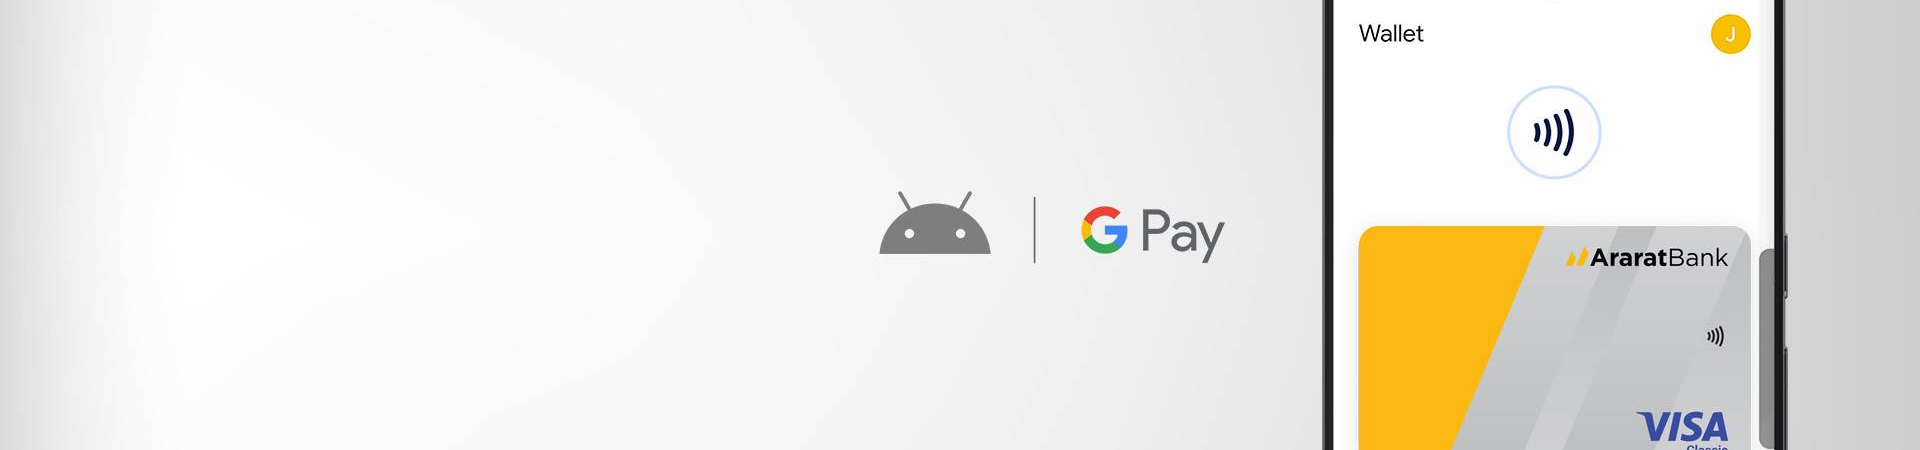 Google Pay payments